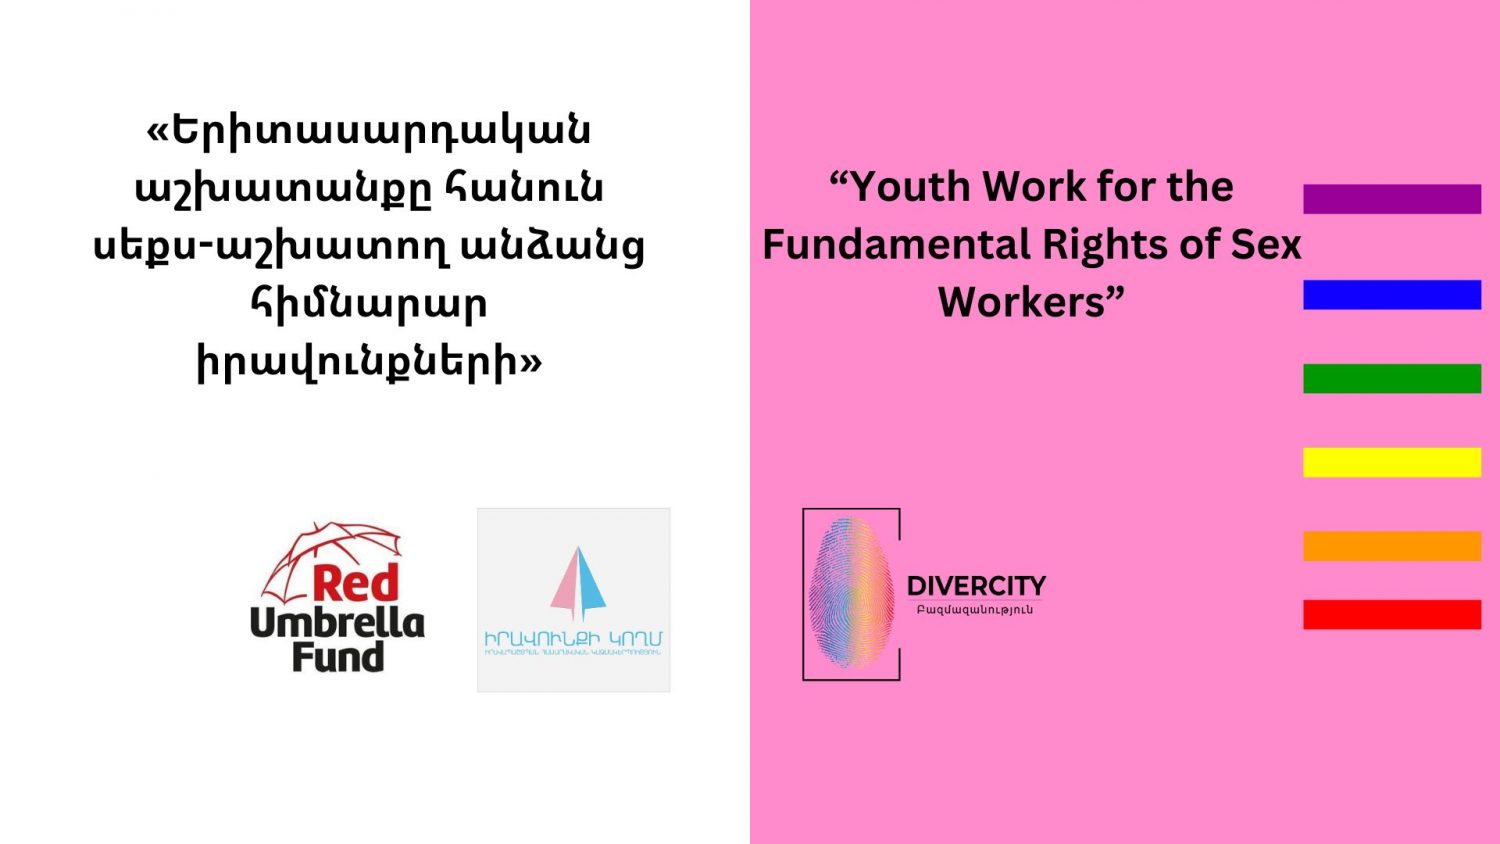 Youth Work for the Fundamental Rights of Sex Workers